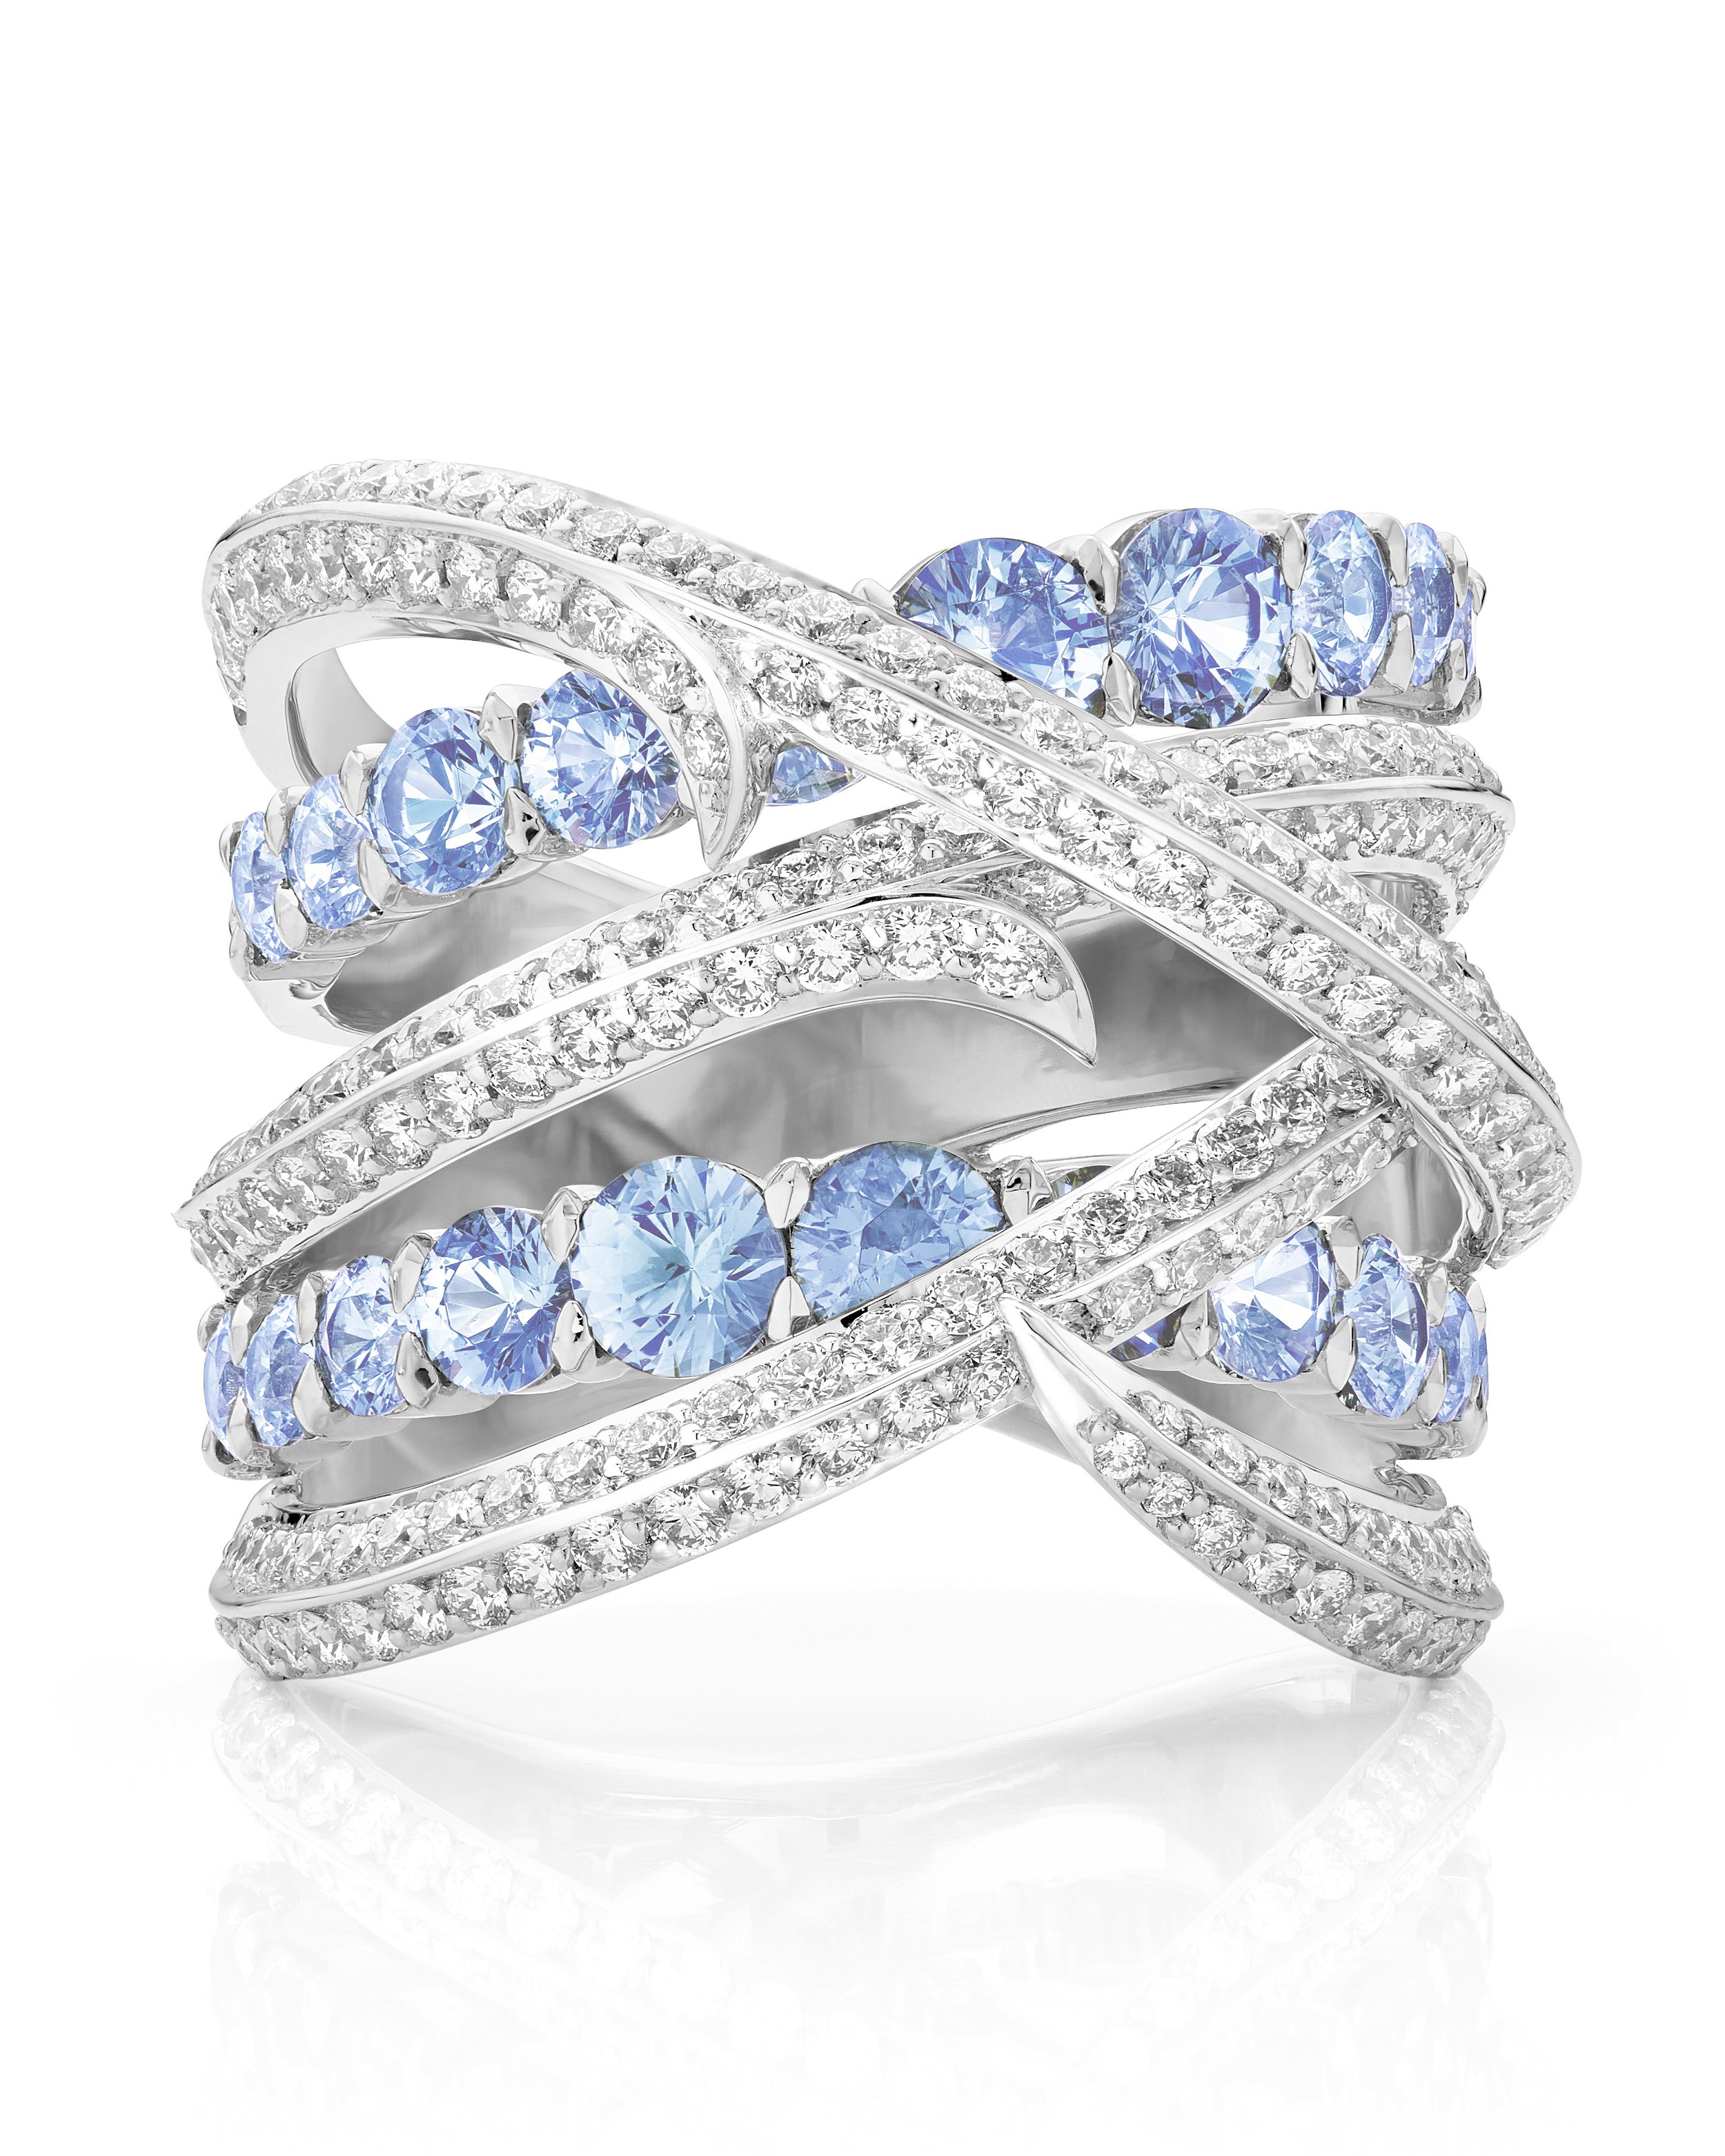 Thorn Embrace Bound Together Gem Band Ring with Light Blue Sapphires and White Diamonds in 18kt White Gold